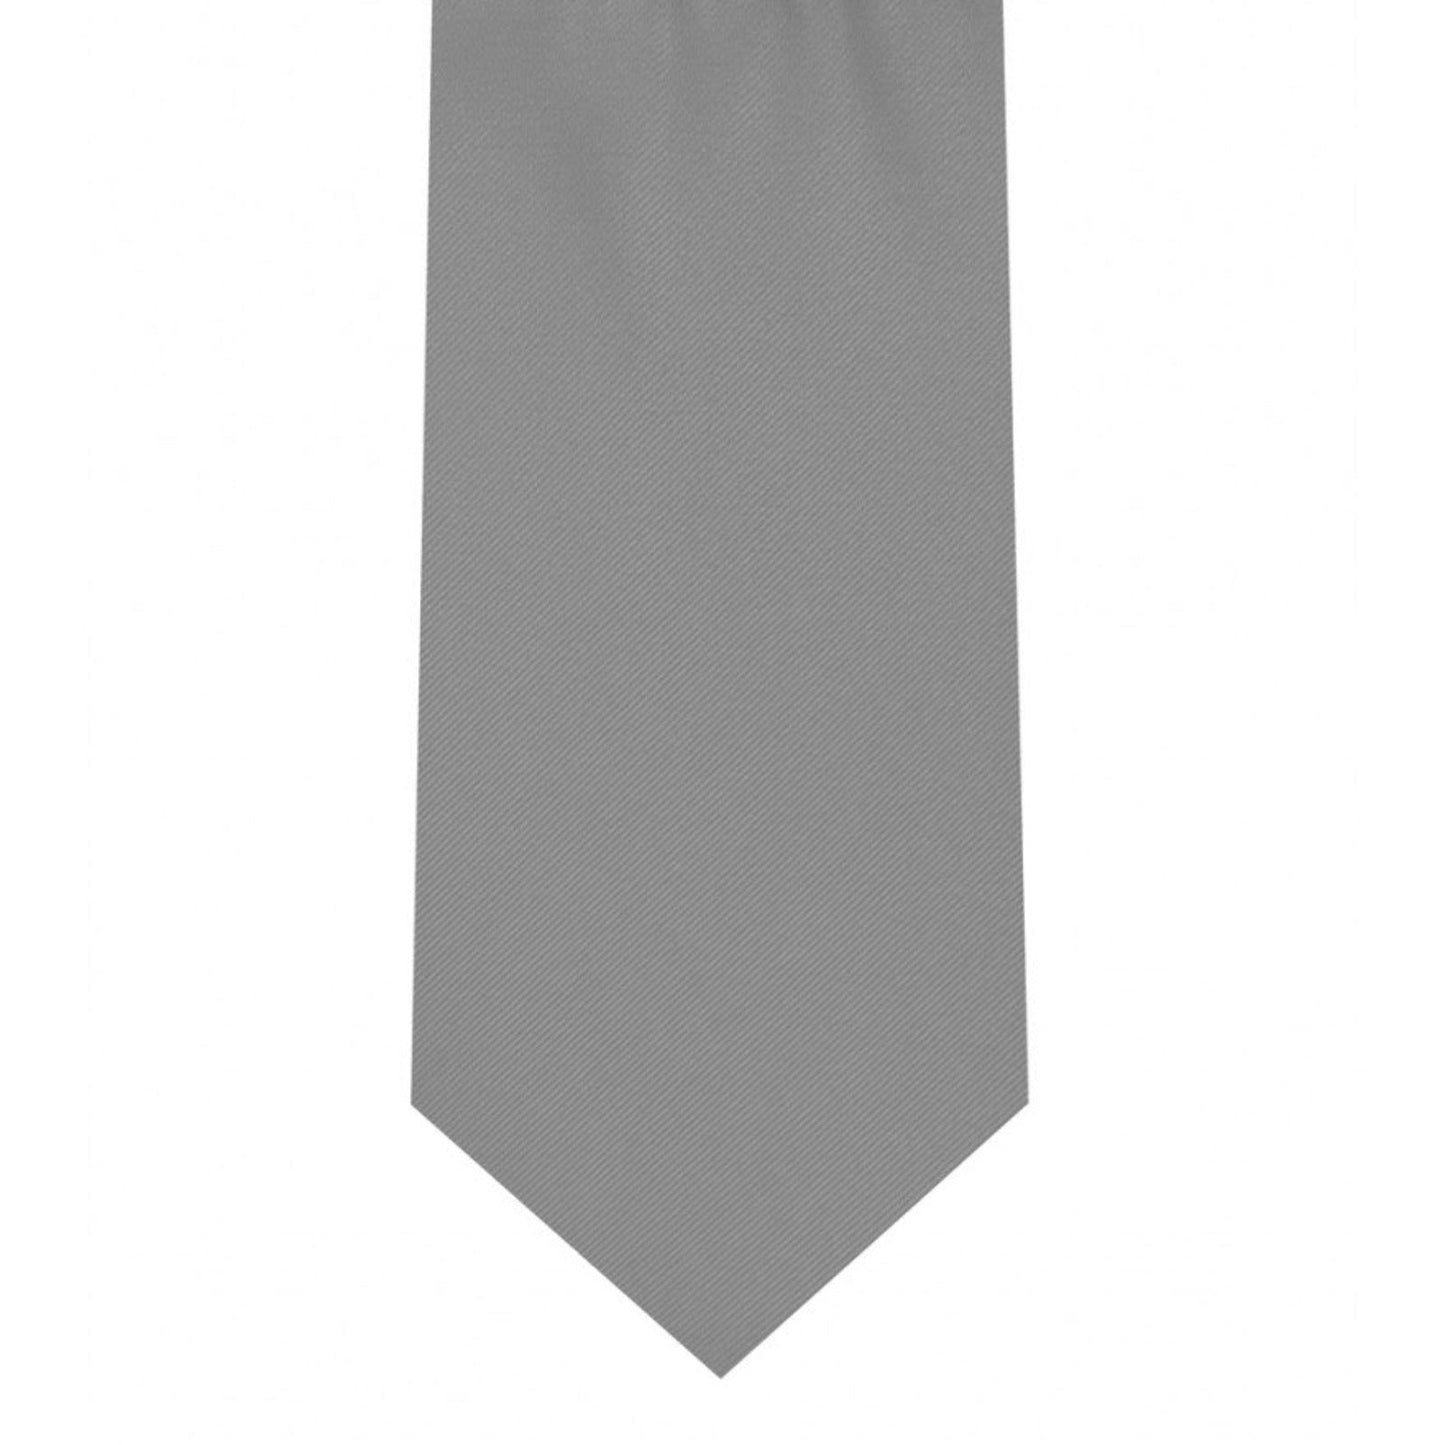 Classic Dark Silver Tie Skinny width 2.75 inches With Matching Pocket Square | KCT Menswear 